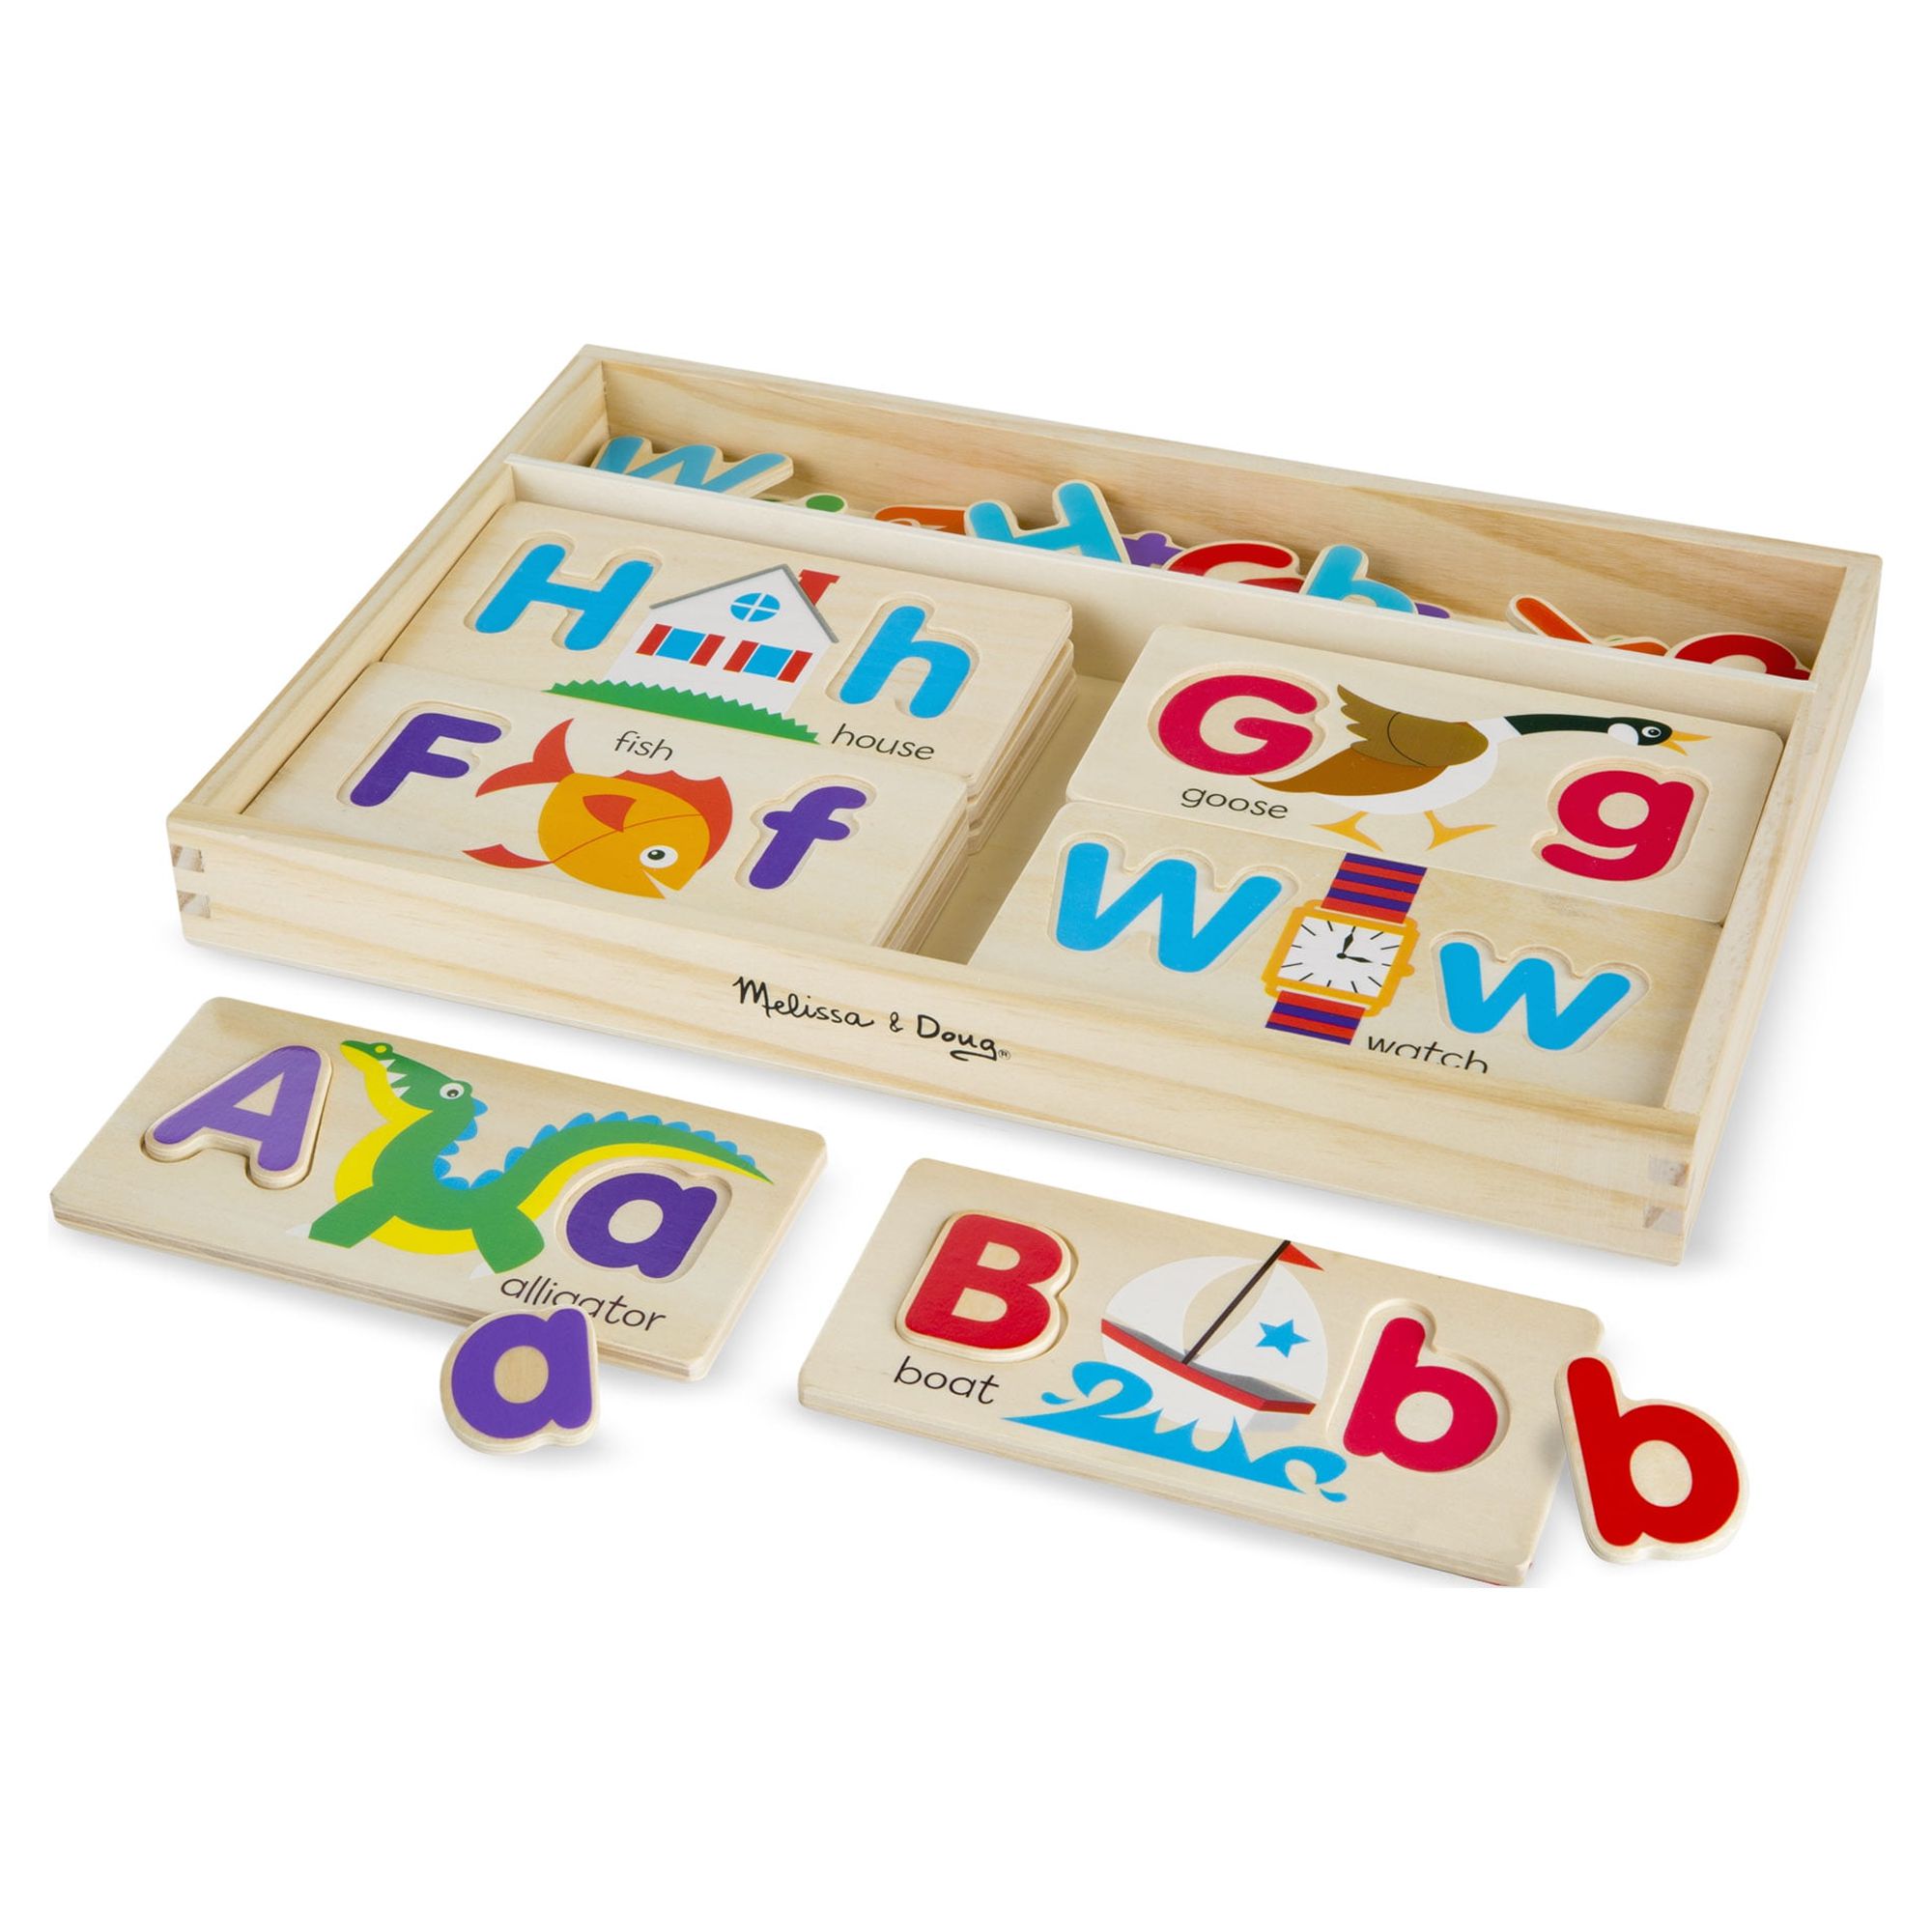 Melissa & Doug ABC Picture Boards - Educational Toy With 13 Double-Sided Wooden Boards and 52 Letters - image 1 of 9